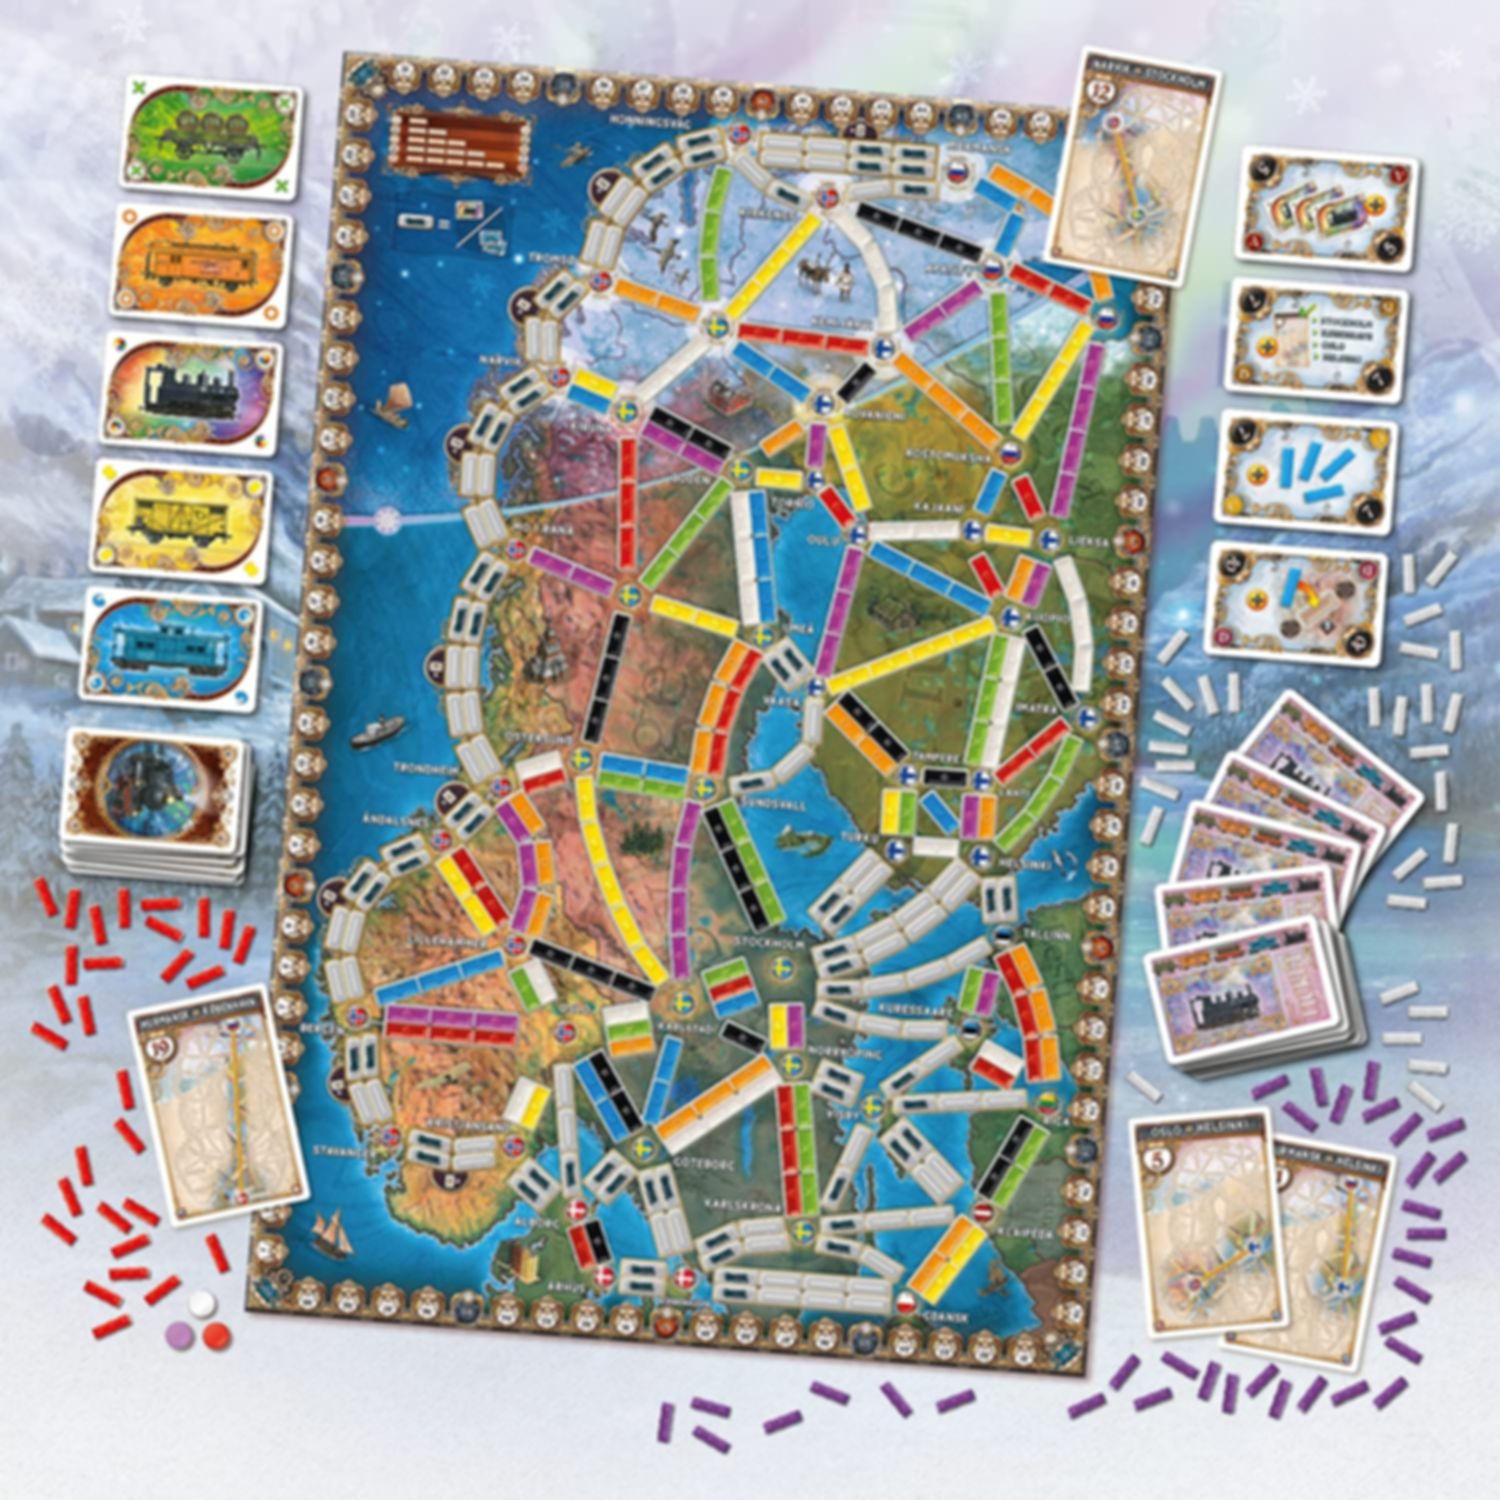 Ticket to Ride: Northern Lights components